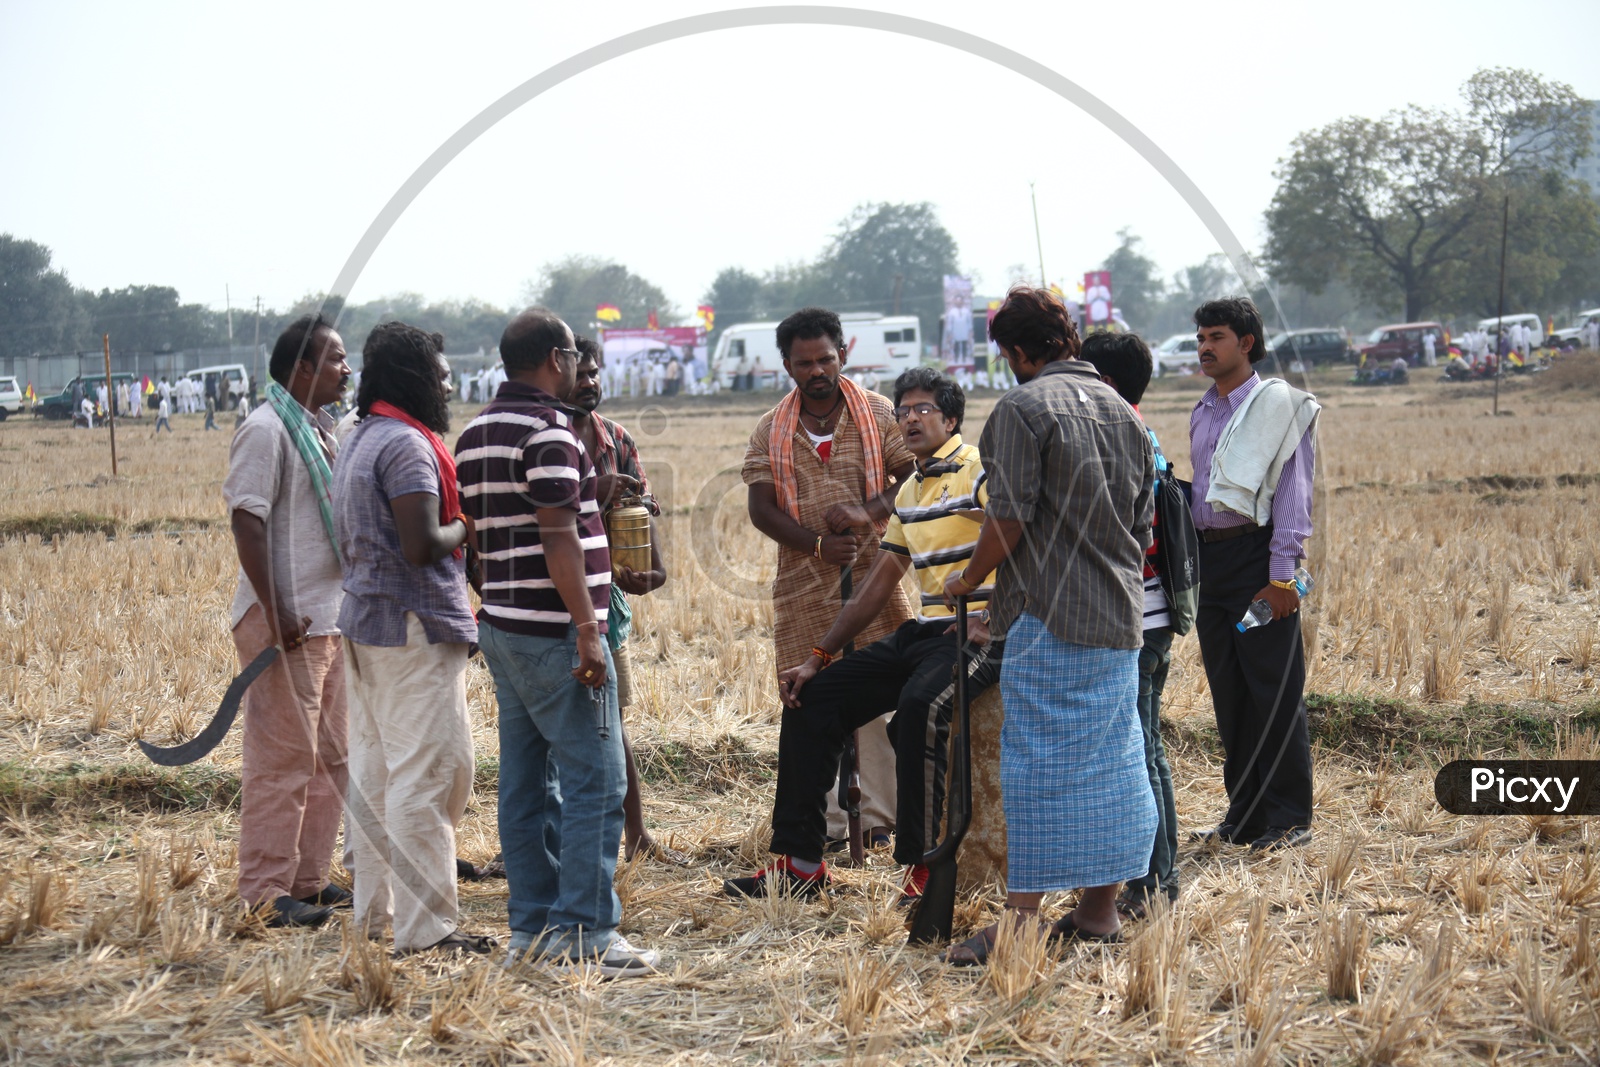 A Leader Discussing With  Their Followers in Dried Paddy Fields